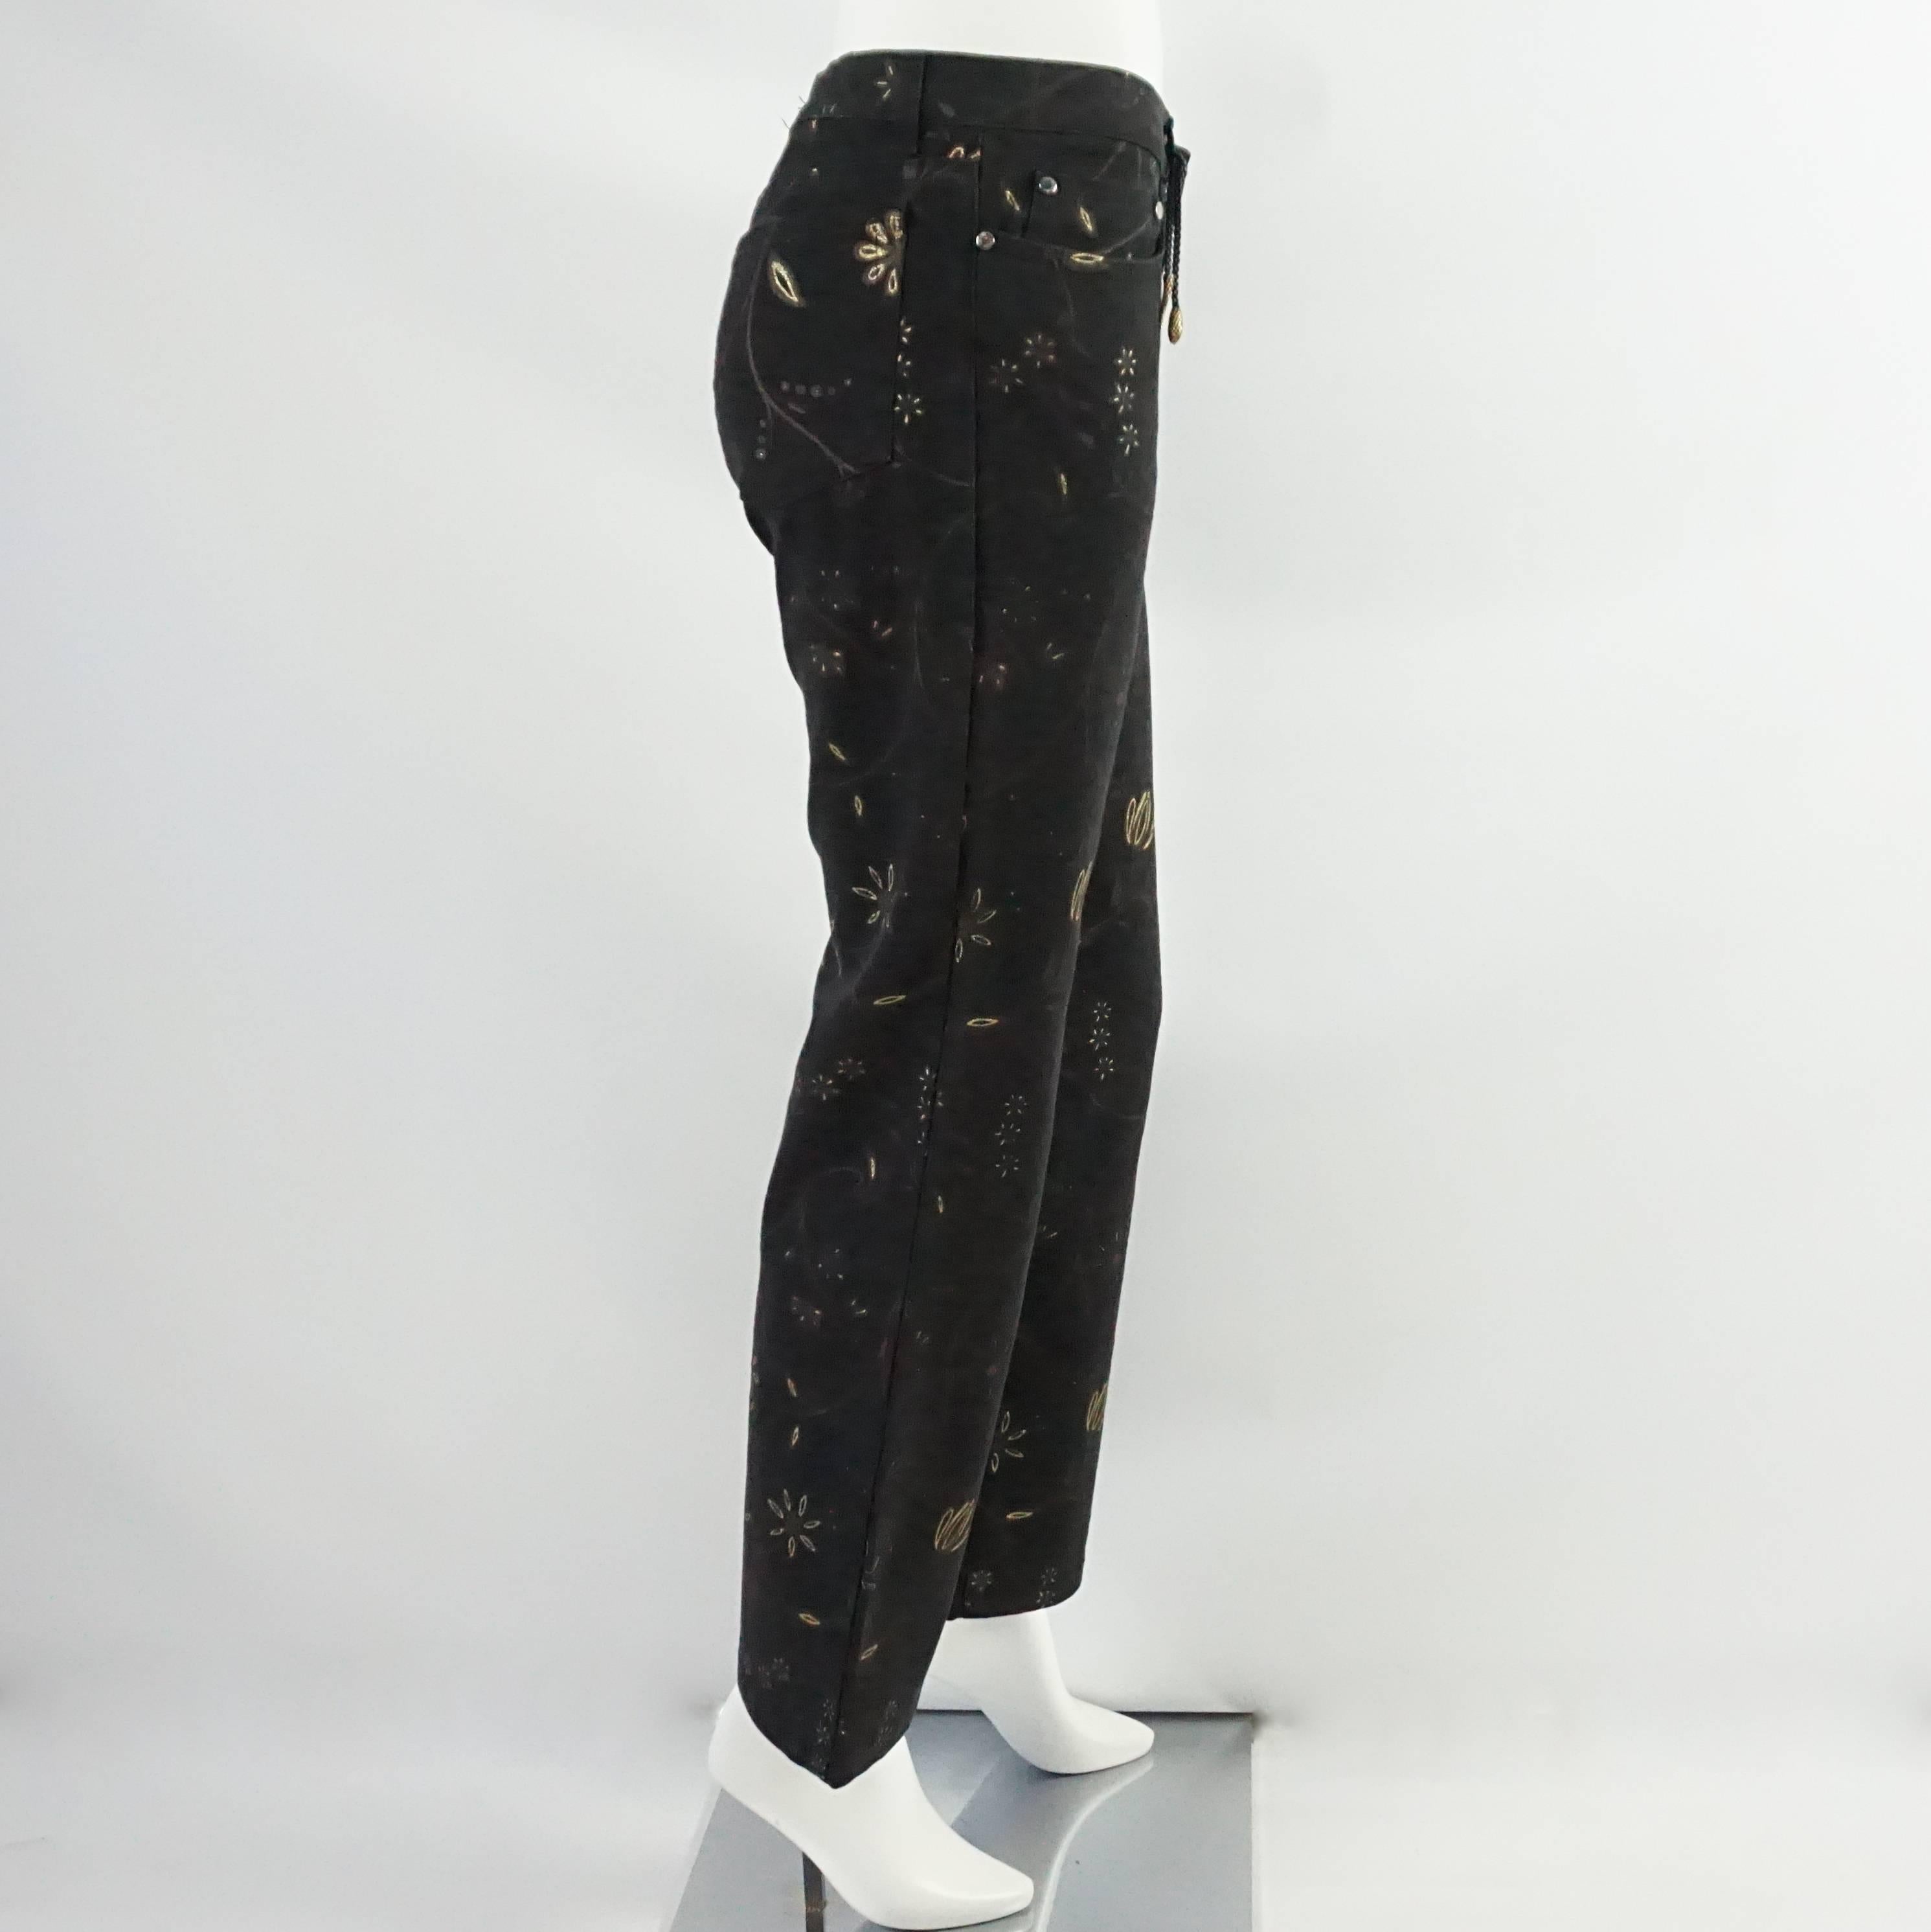 These Mid Waisted 1990's Roberto Cavalli jeans are black and have a gold metallic floral print. The hardware is silver and there is a black braided detail with 2 bronze charms (head and tail of a snake) hanging from one of the belt loops. The button